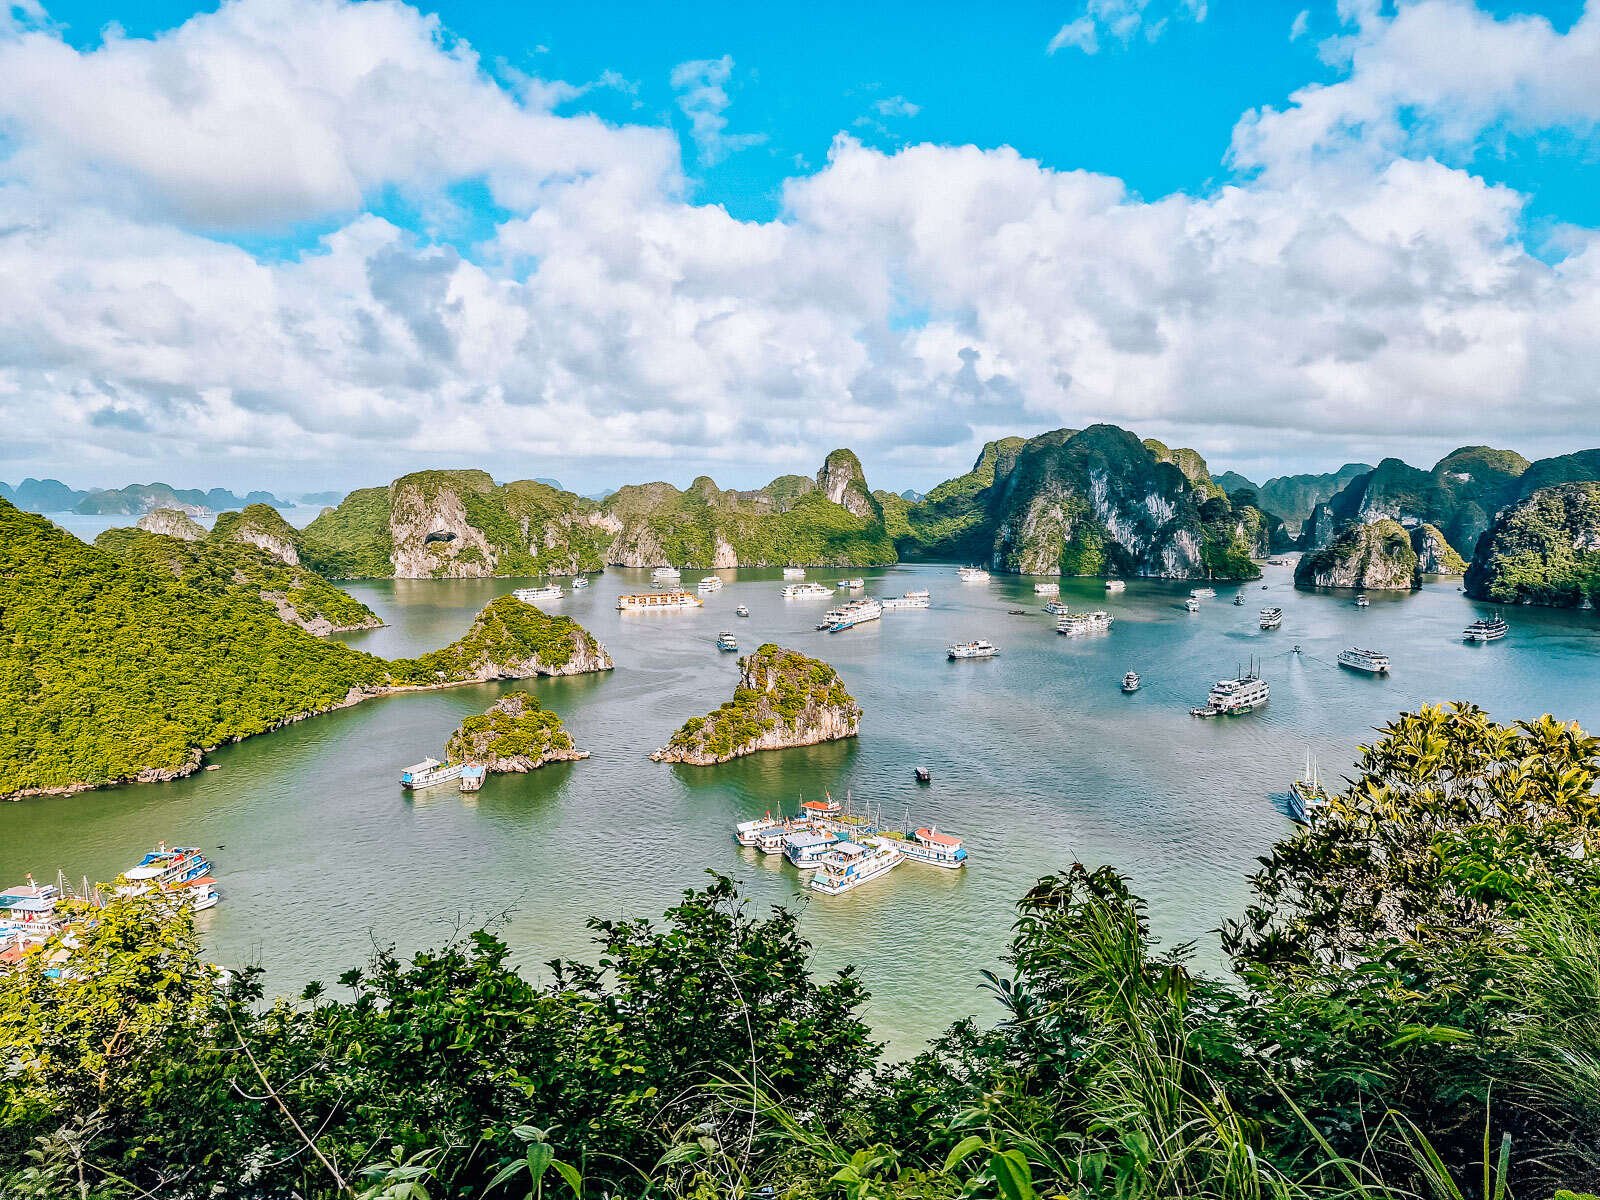 Aerial view of Ha Long Bay with boats in the water